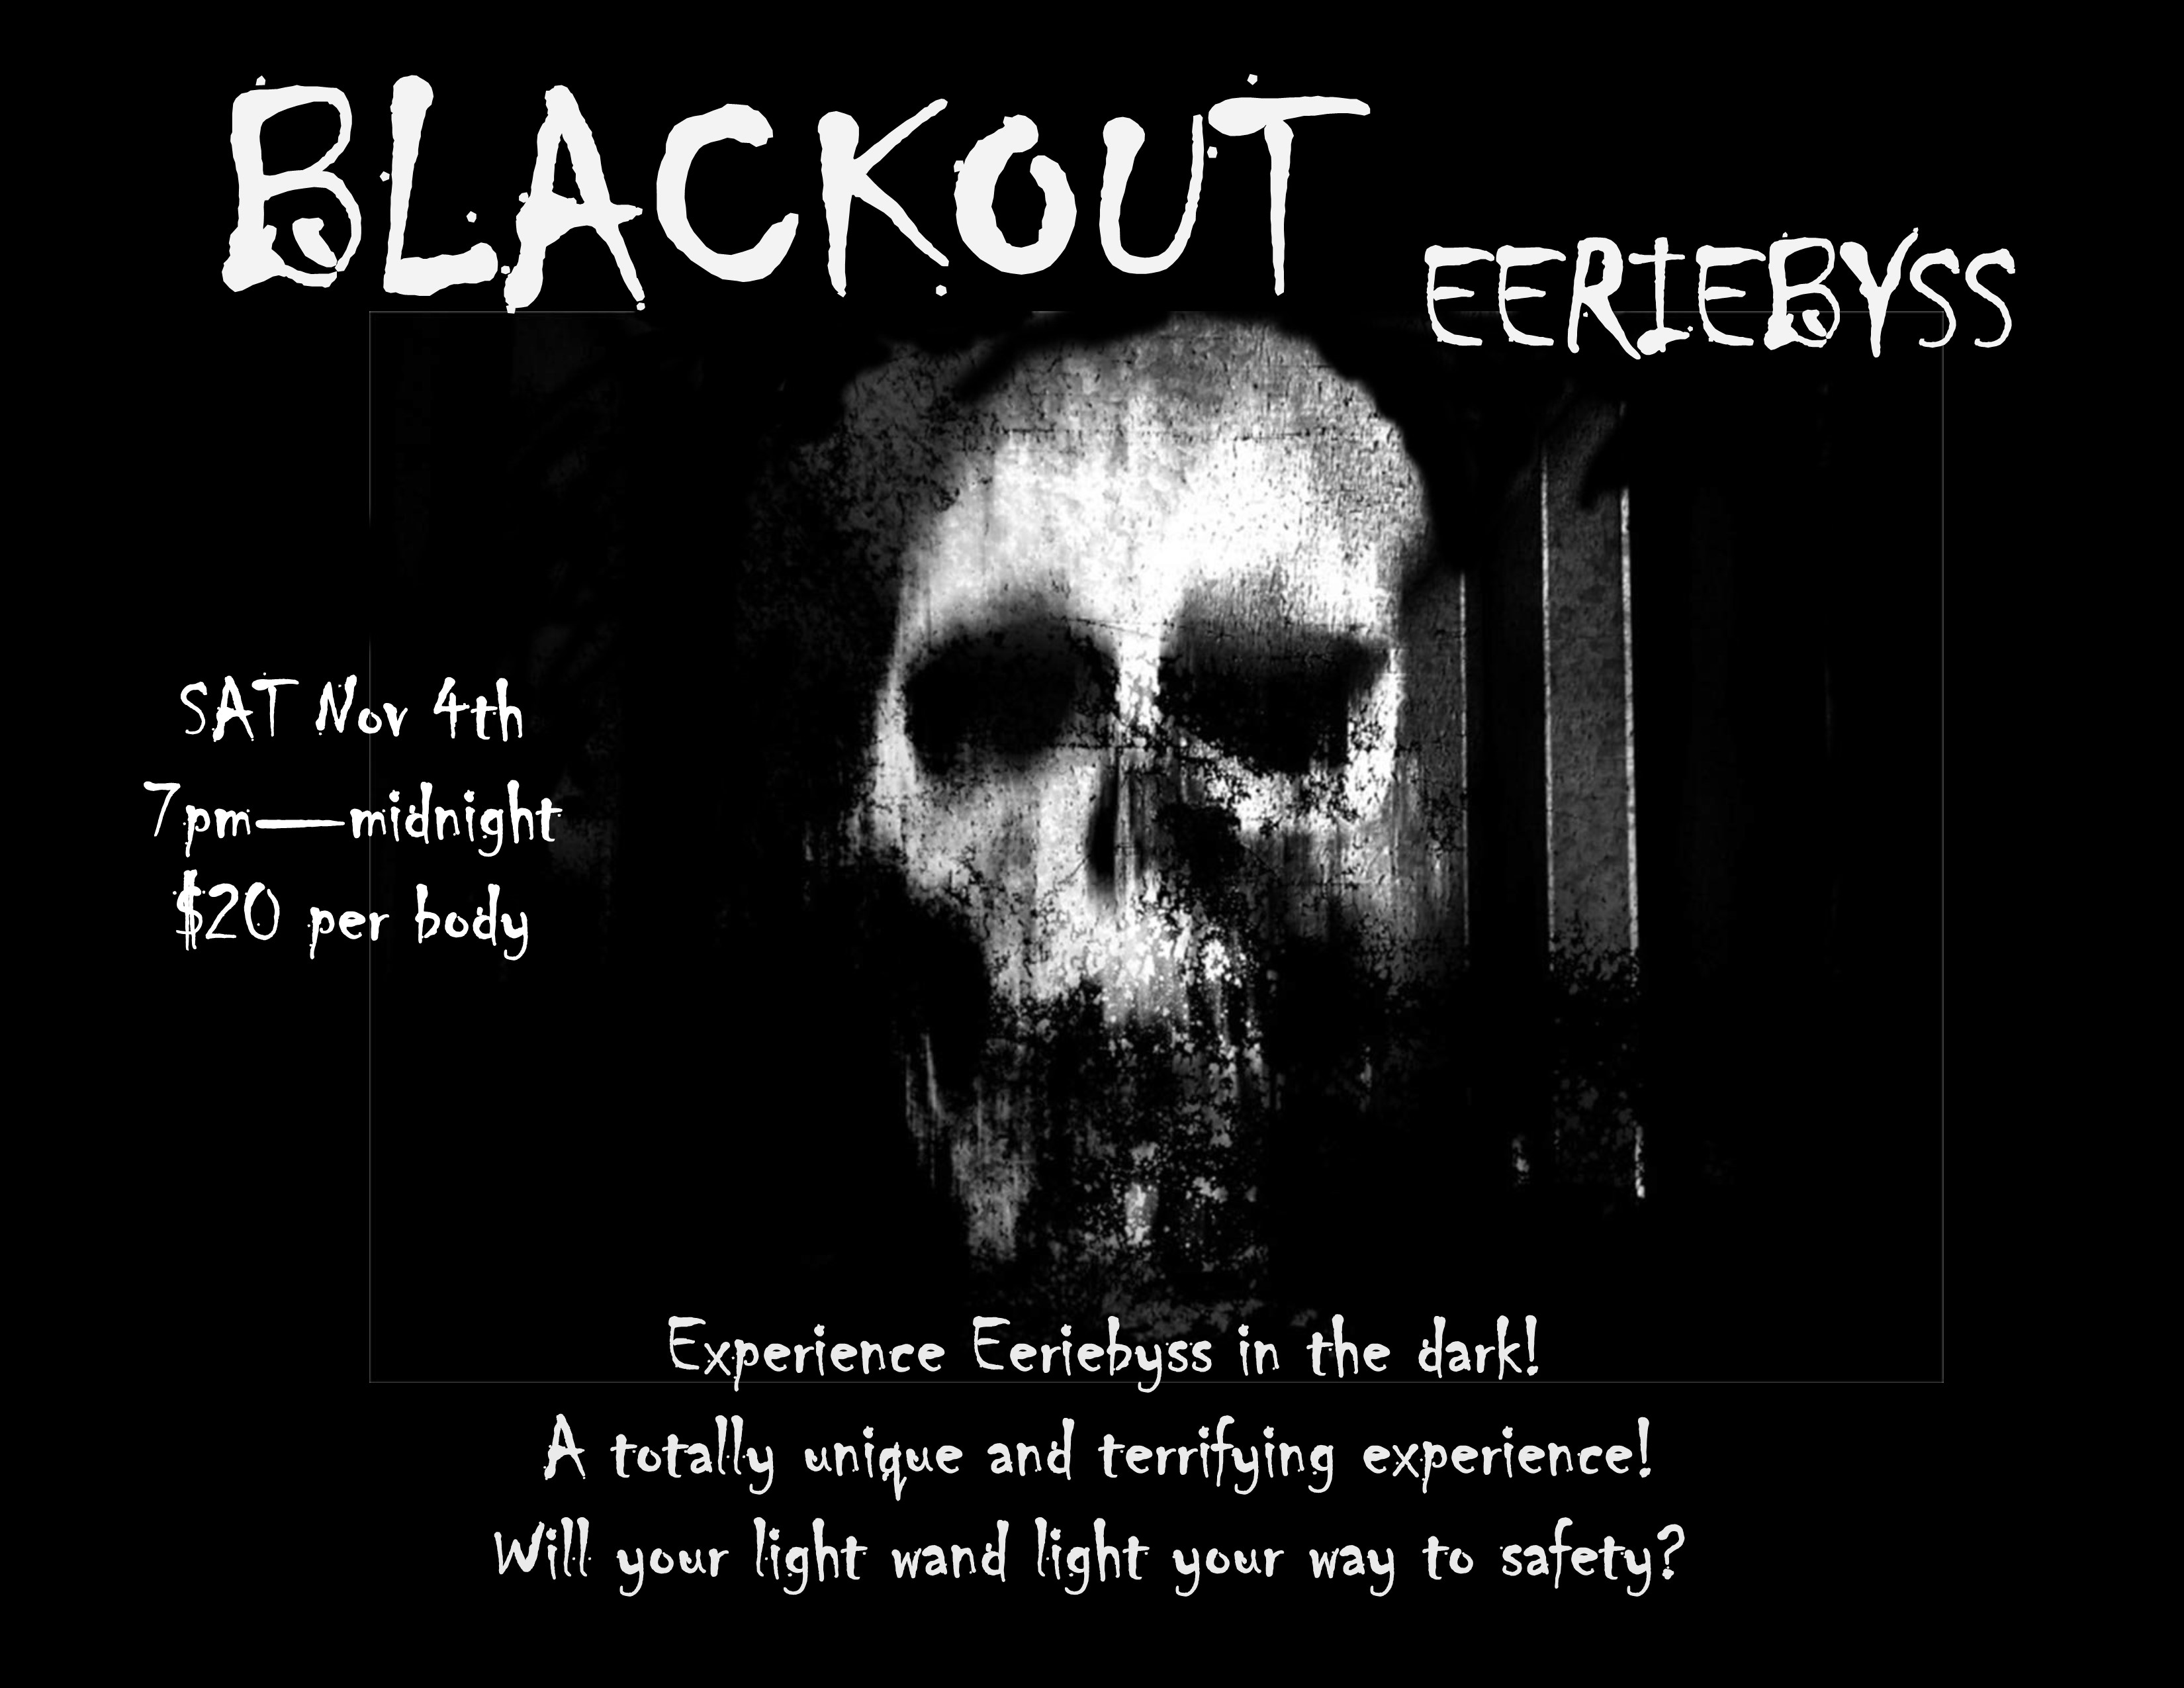 Eeriebyss 2024 Blackout date is November 2nd. Experience Eeriebyss completely in the dark.